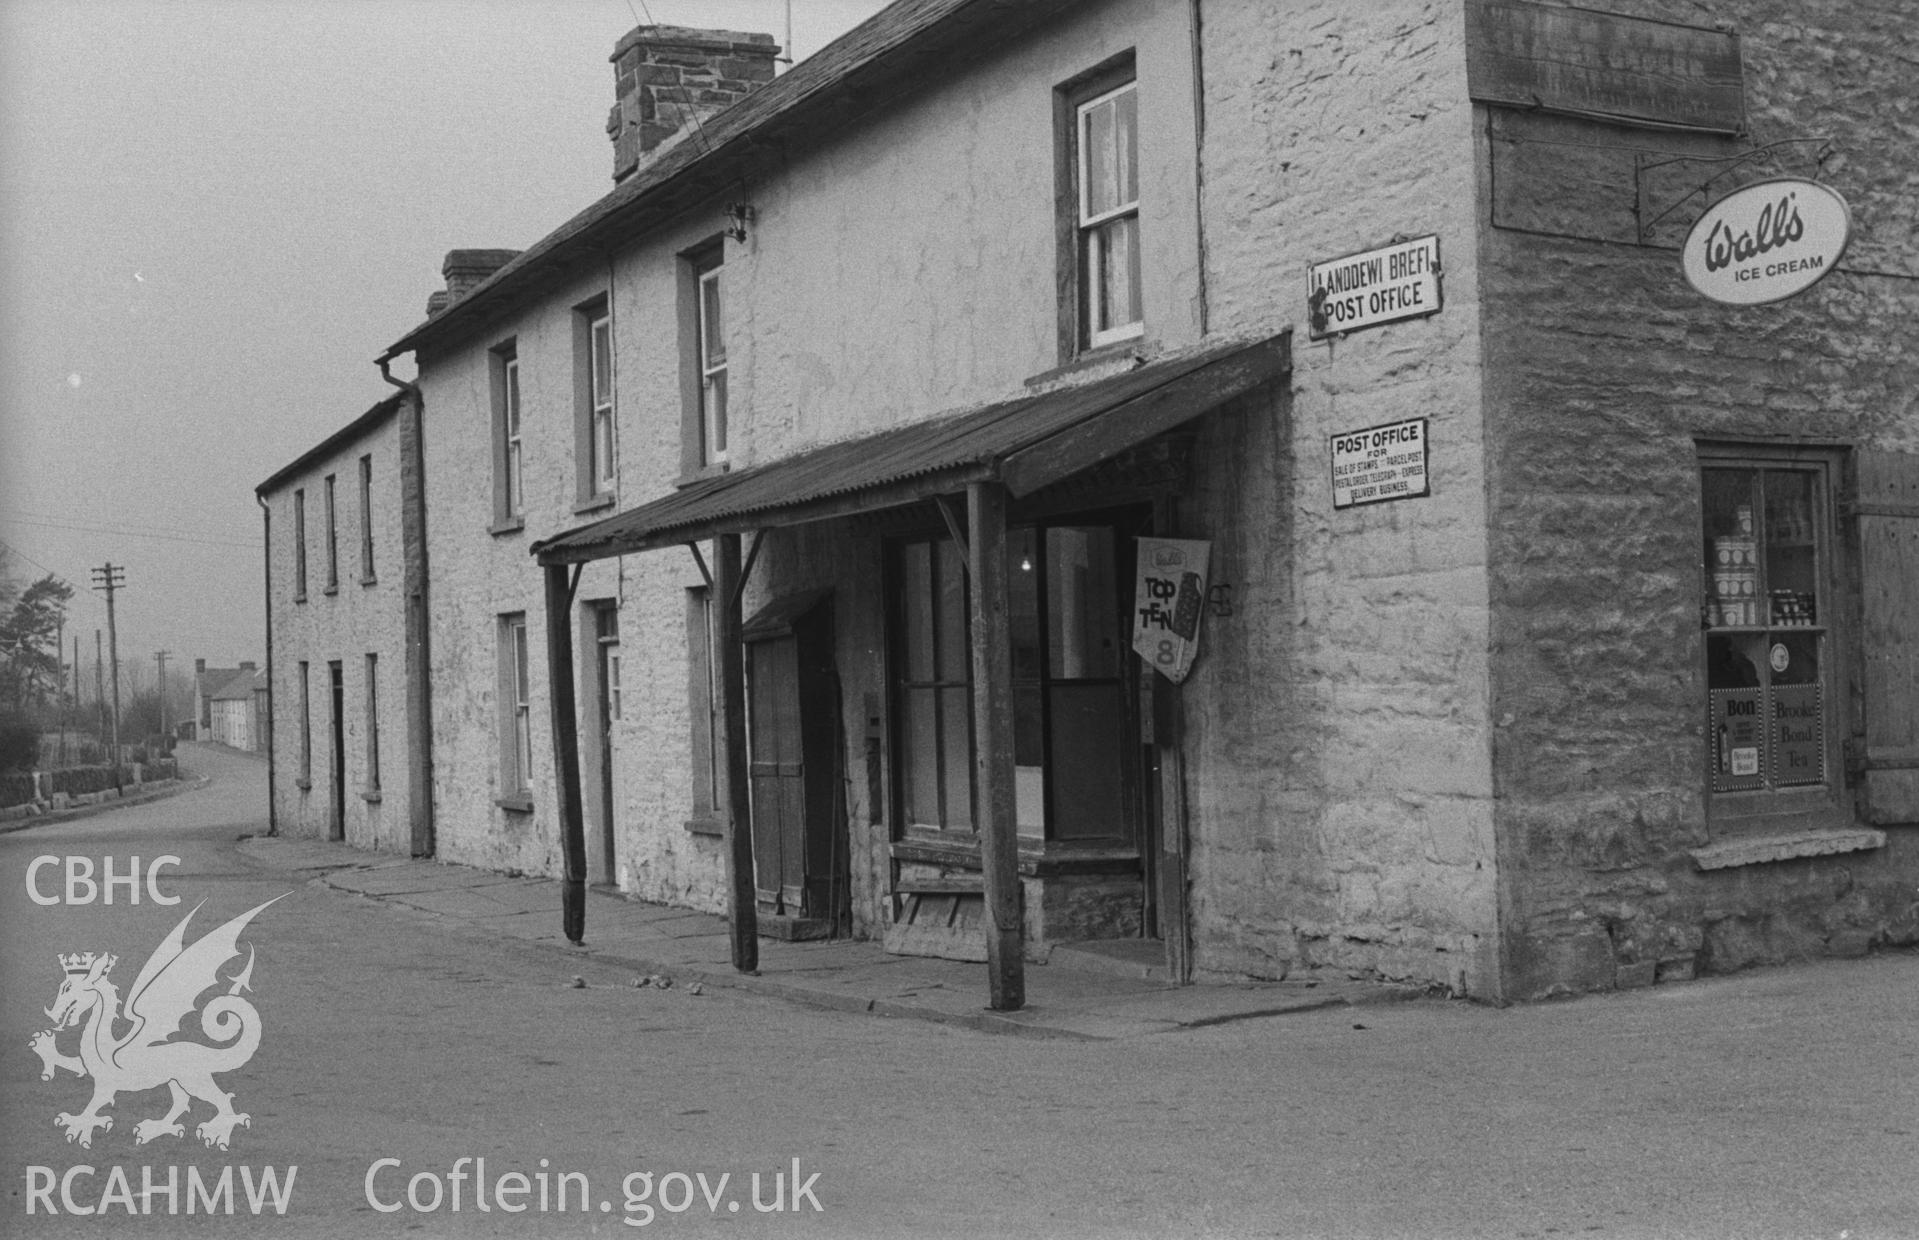 Digital copy of a black and white negative showing the post office at Llanddewi Brefi. Photographed in April 1963 by Arthur O. Chater from Grid Reference SN 6631 5529, looking west.